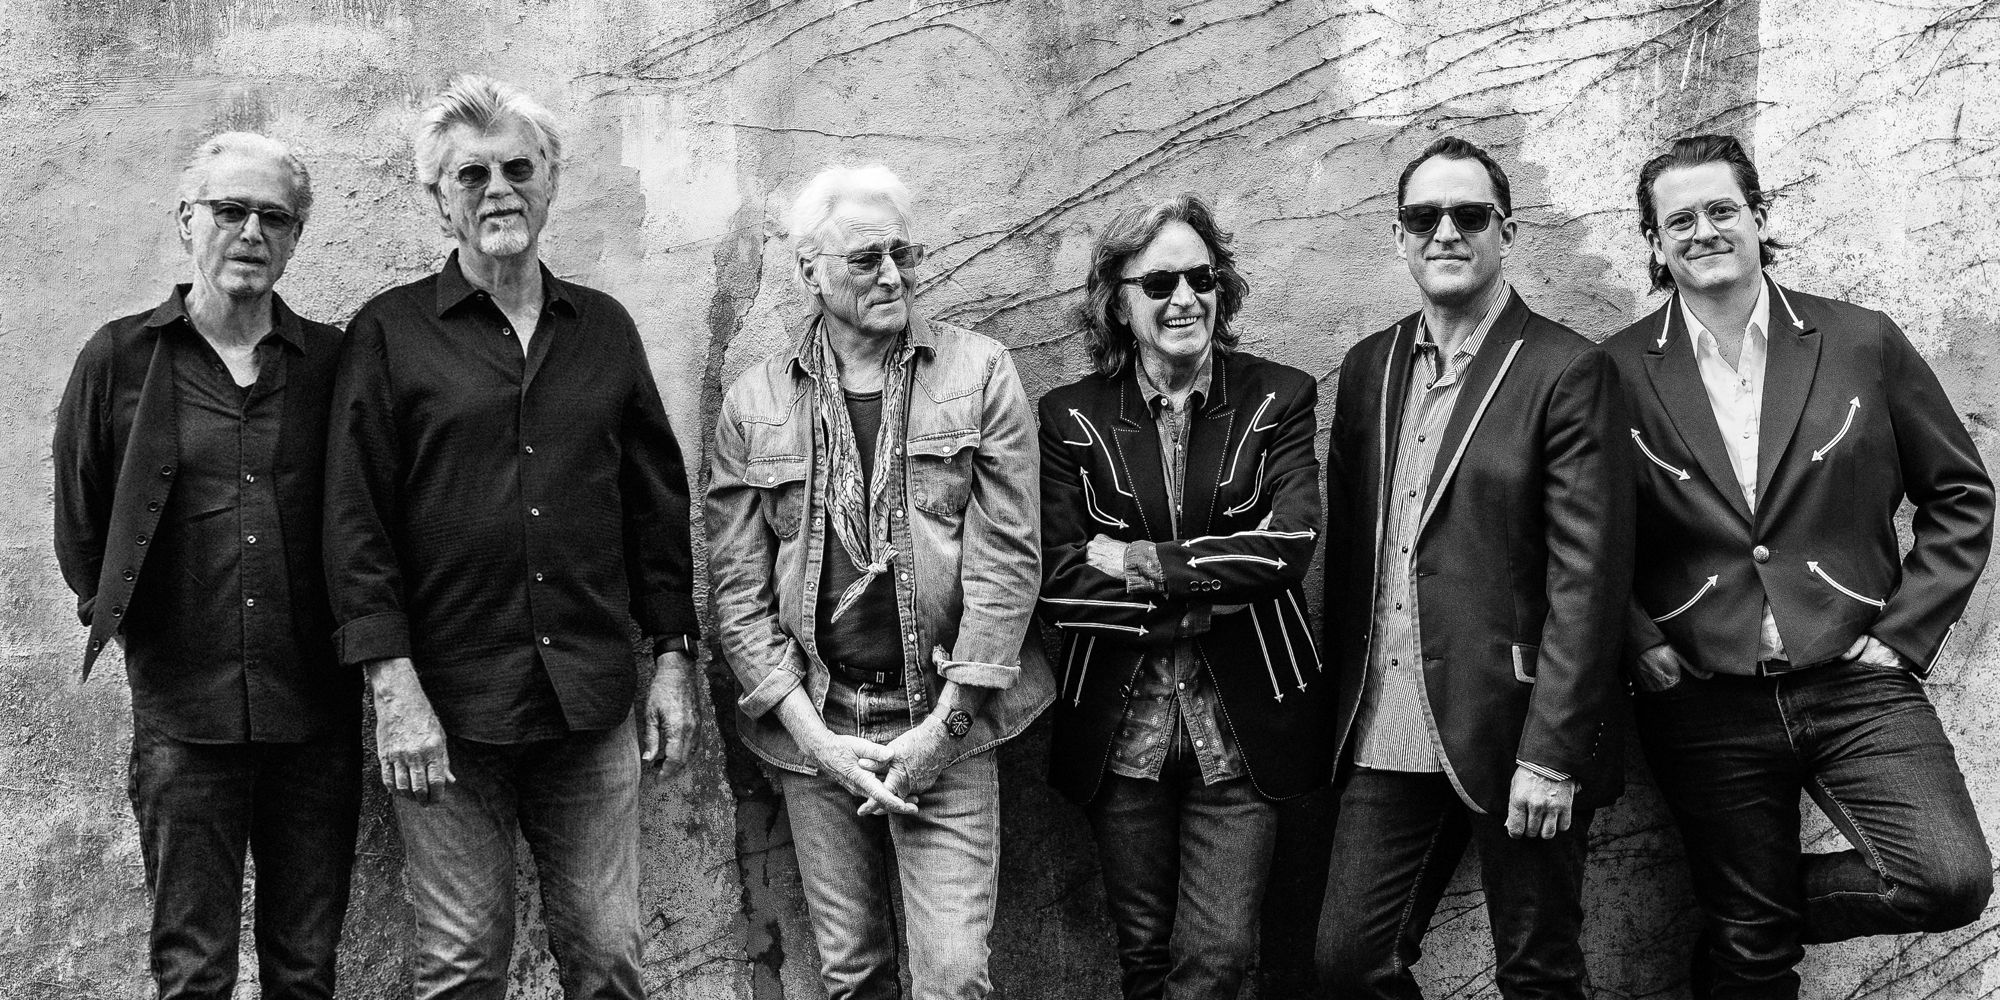 The Nitty Gritty Dirt Band's All The Good Times: The Farewell Tour promotional image